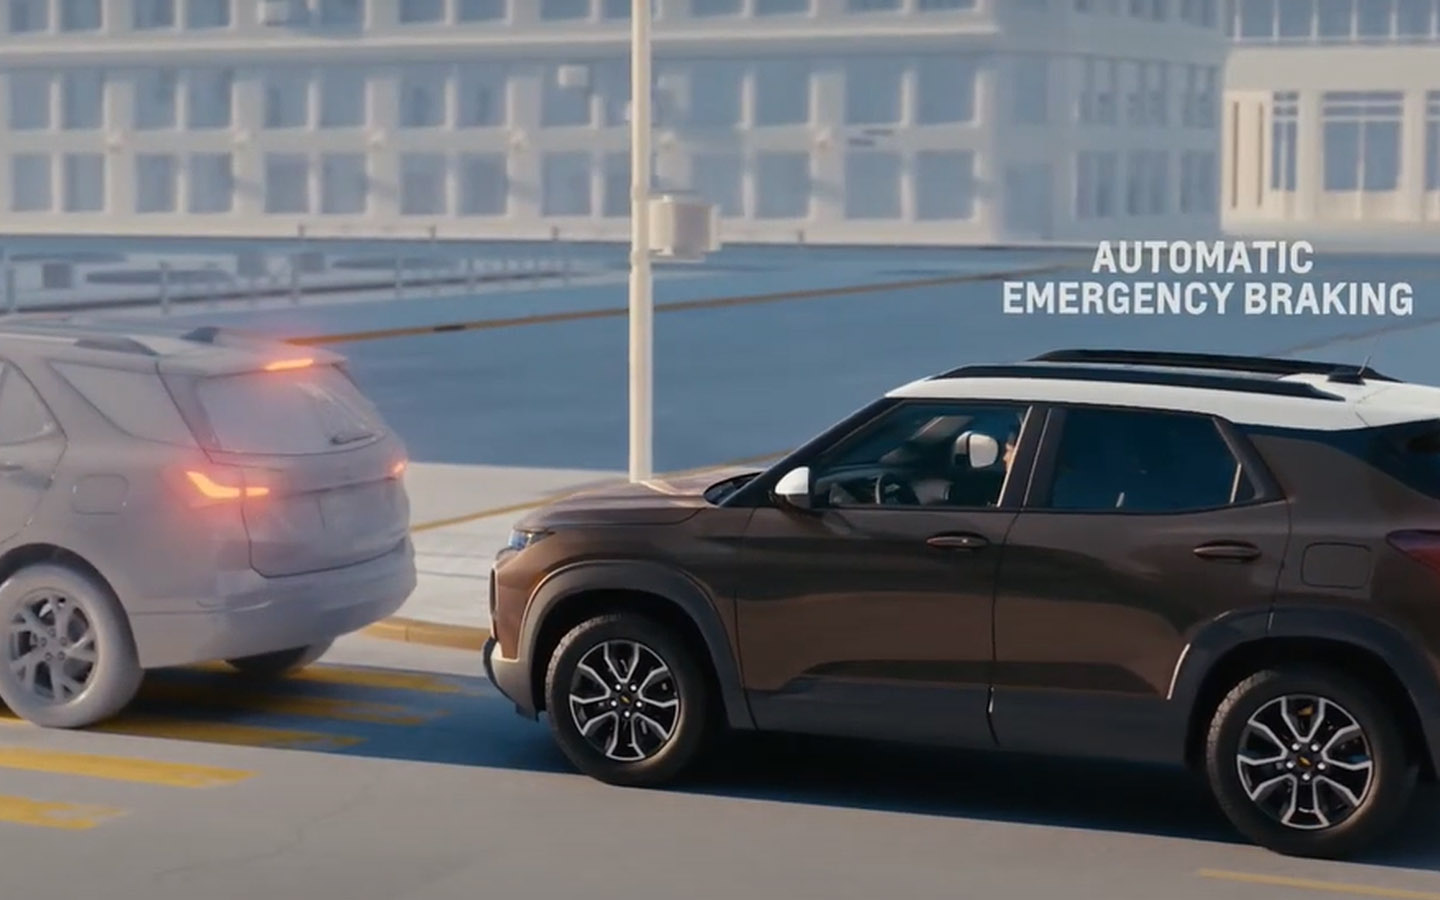 Automatic Emergency Braking feature of Chevrolet Safety Assist